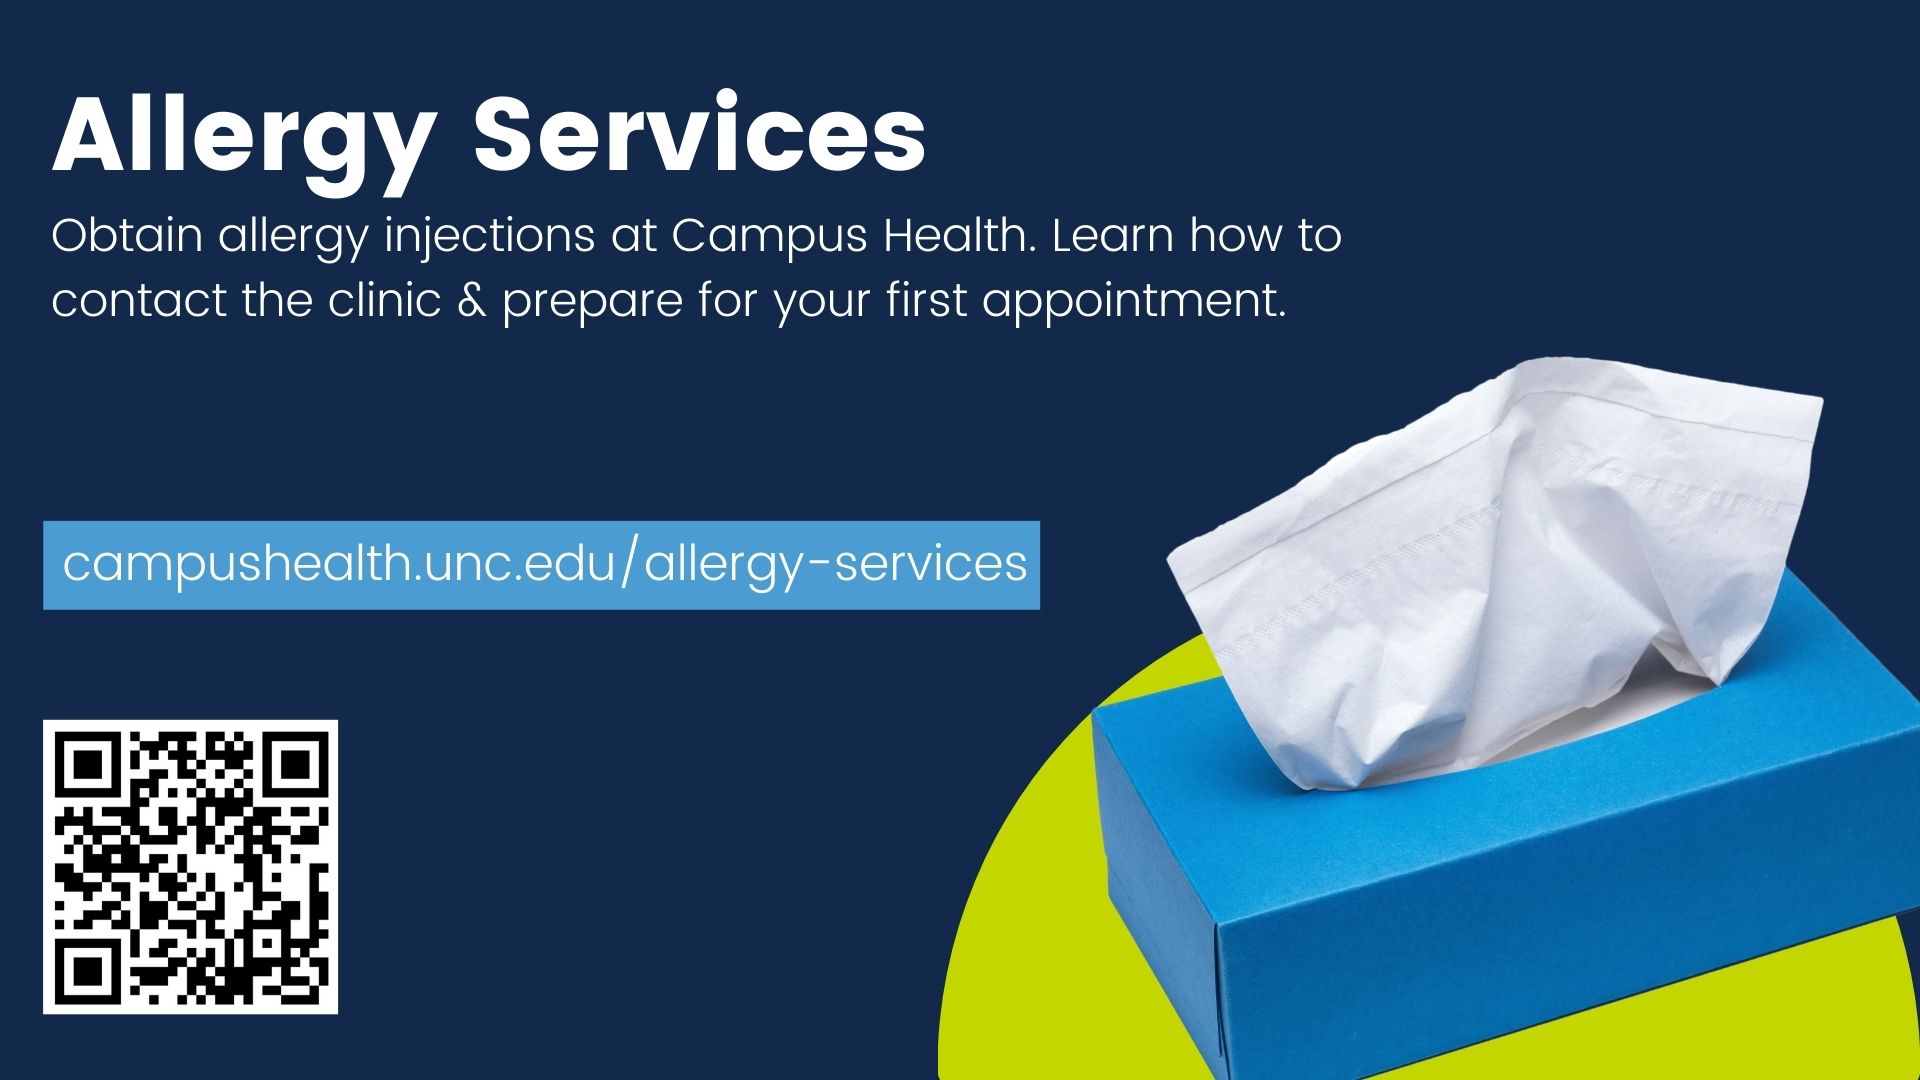 Obtain allergy injections at Campus Health. Learn how to conect the clinic and prepare for your appointment.